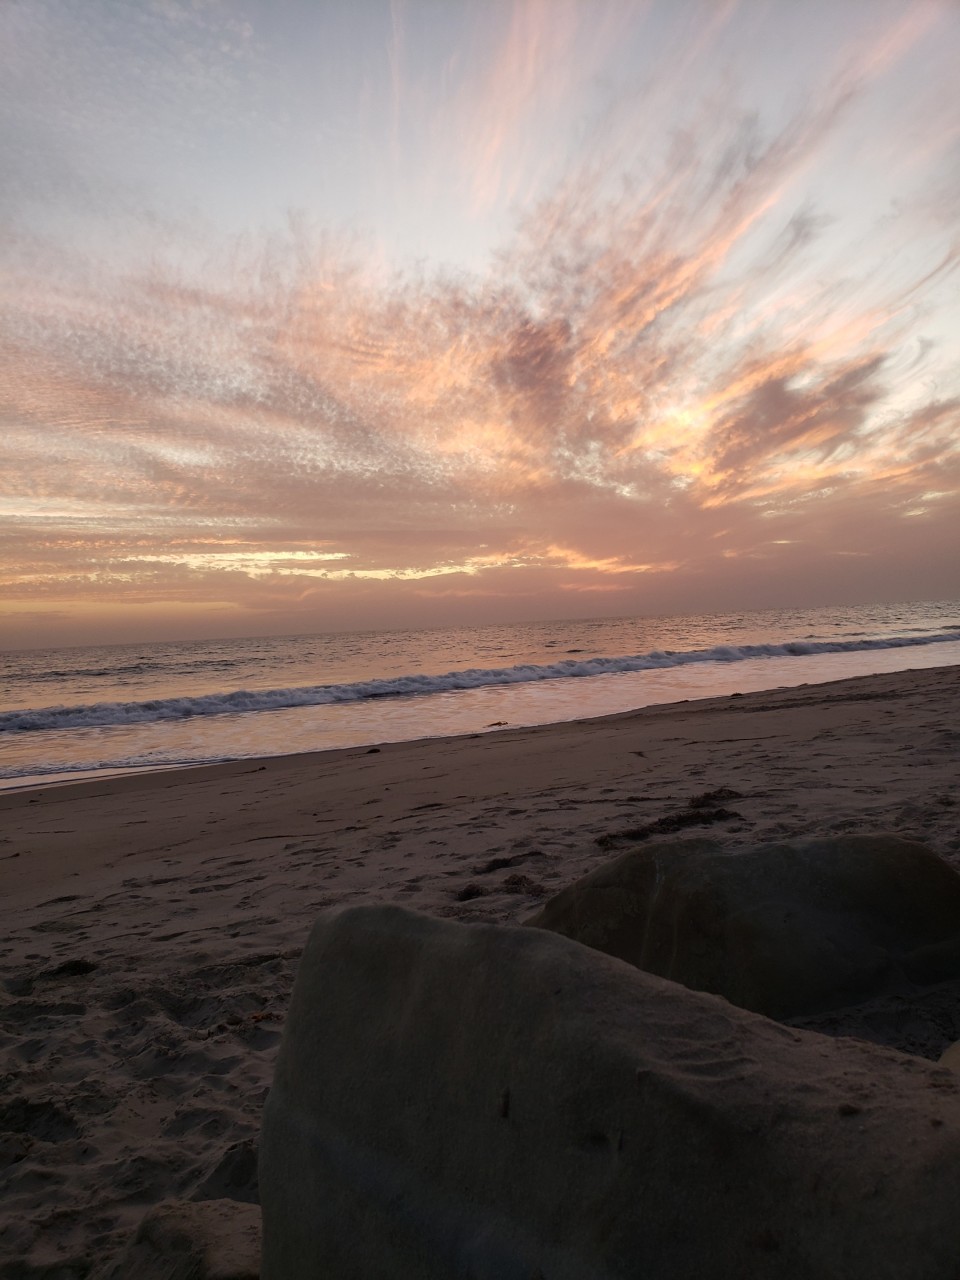 Tonight's sunset while camping along the Ventura California Coast line on Rincon Parkway 